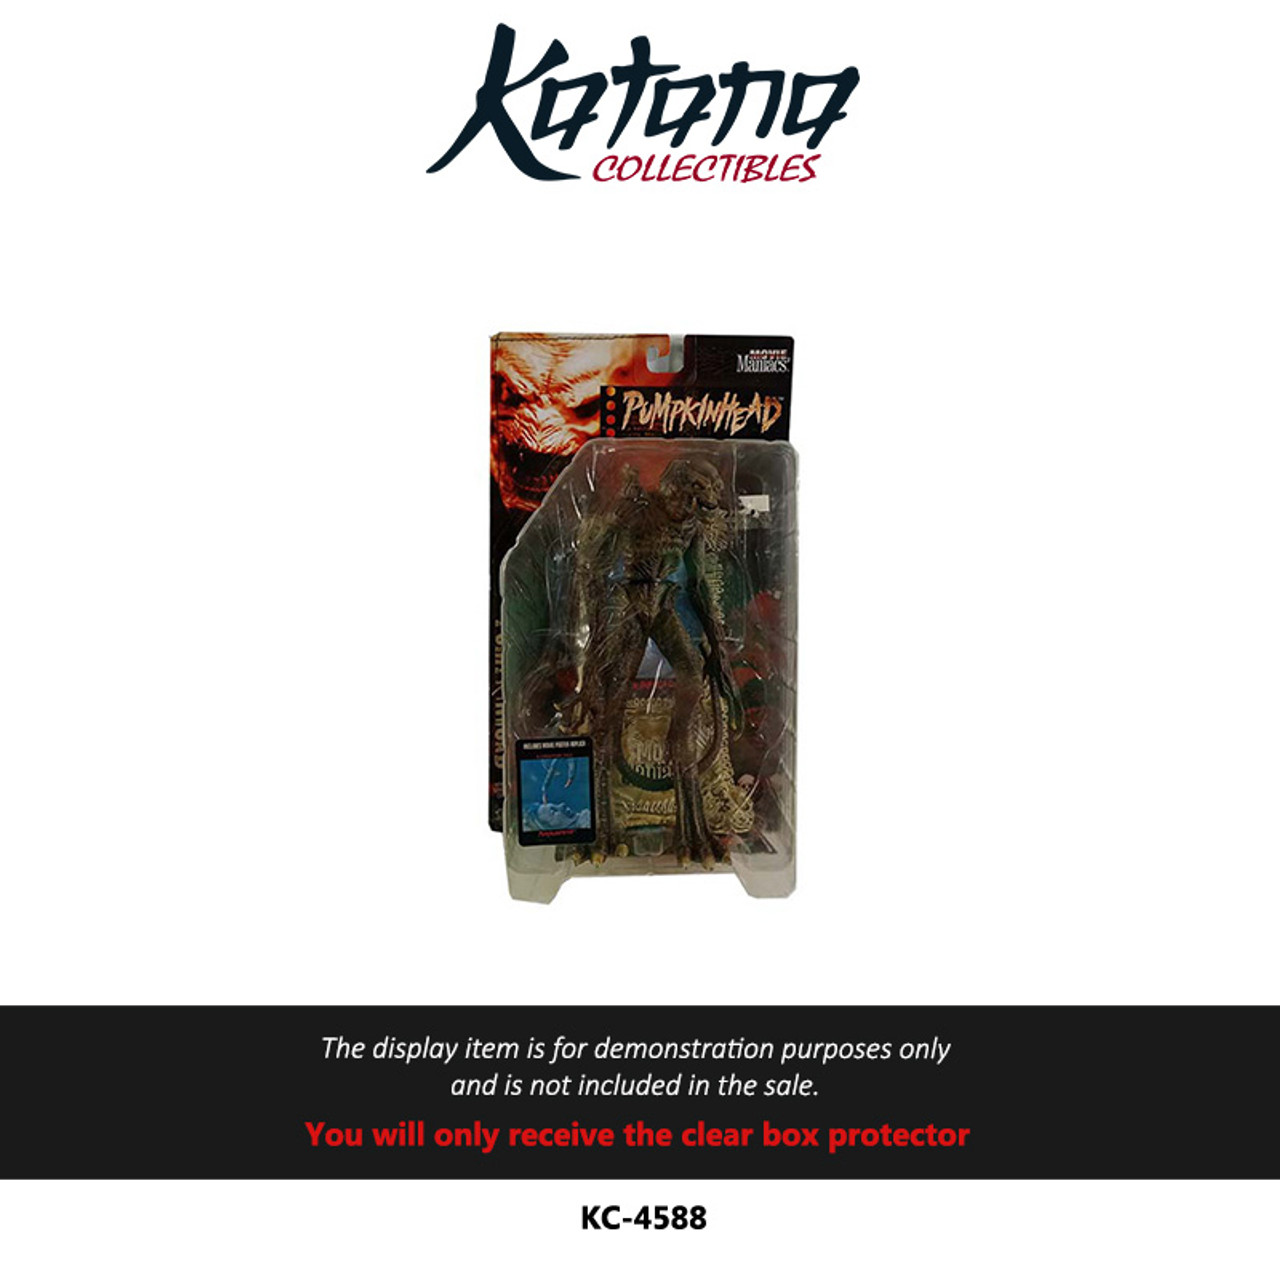 Katana Collectibles Protector For Movie Maniacs Series 2: PumpkinHead by McFarlane Toys